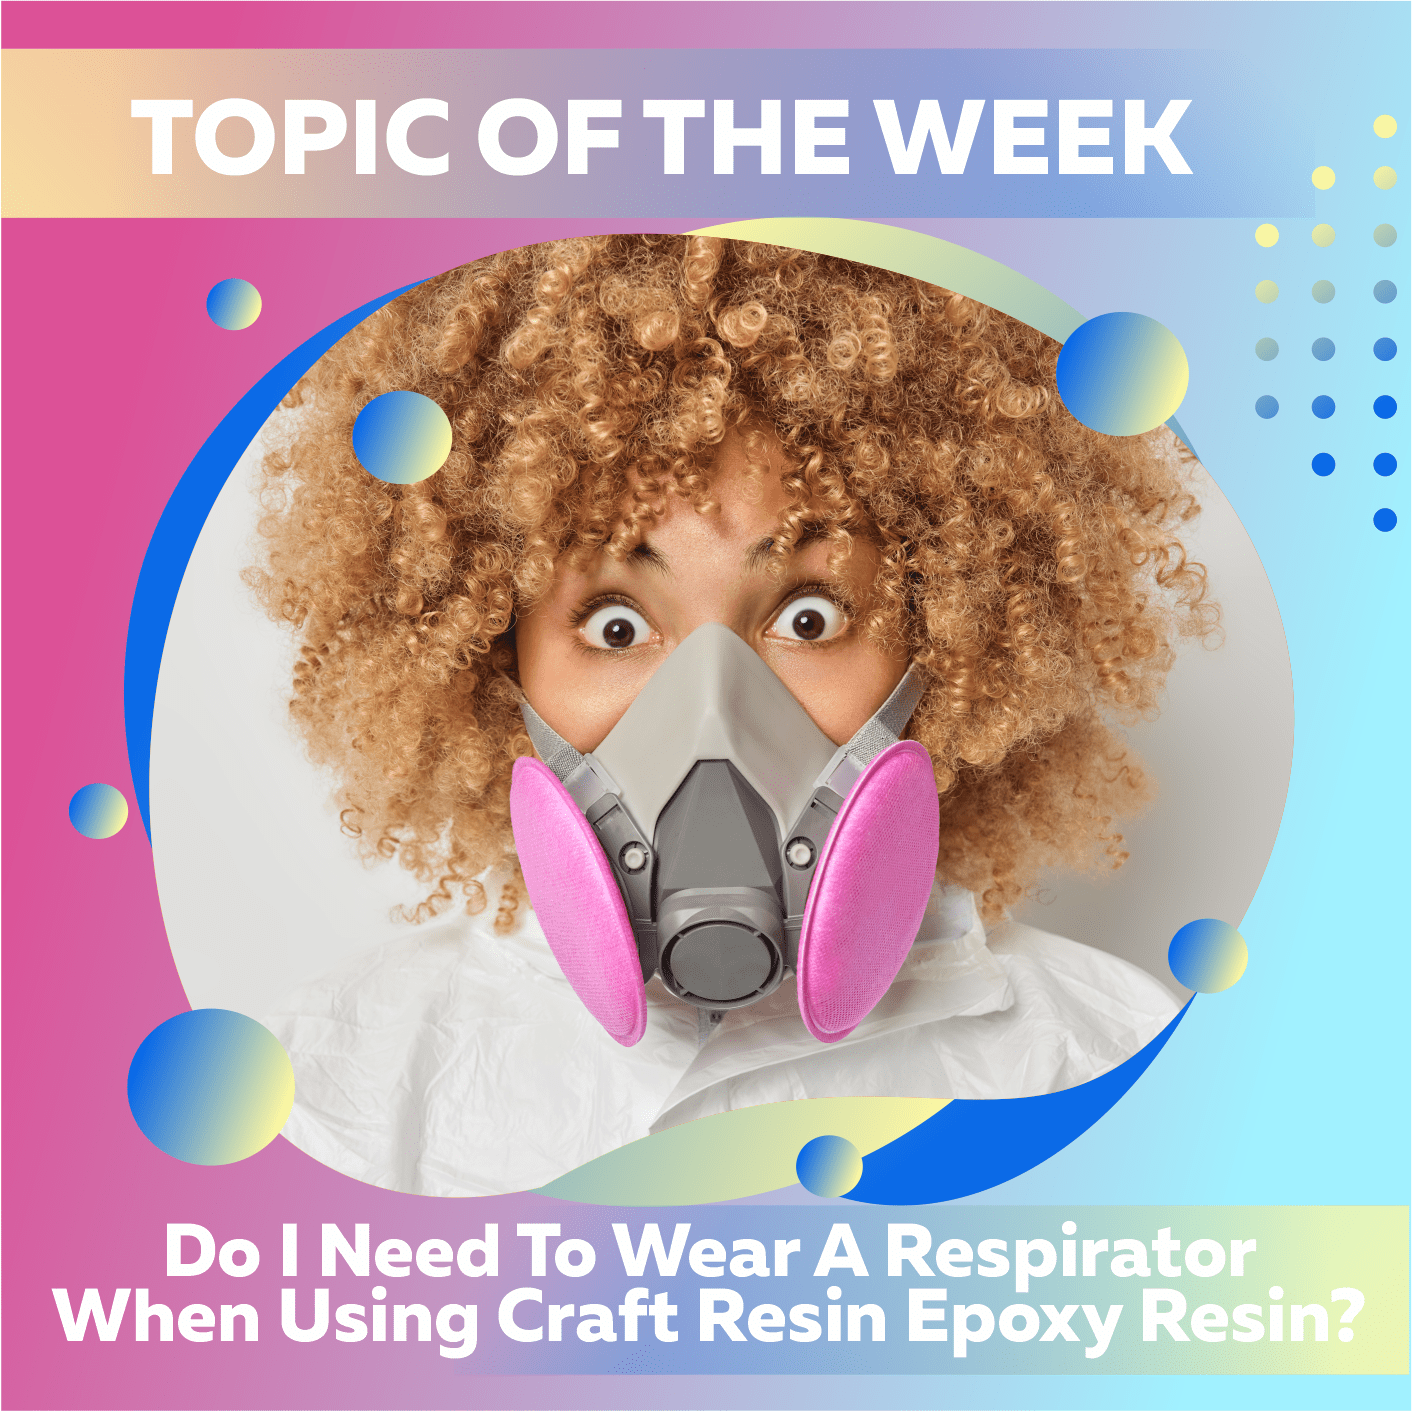 Do I Need To Wear A Respirator When Using Craft Resin Epoxy Resin?